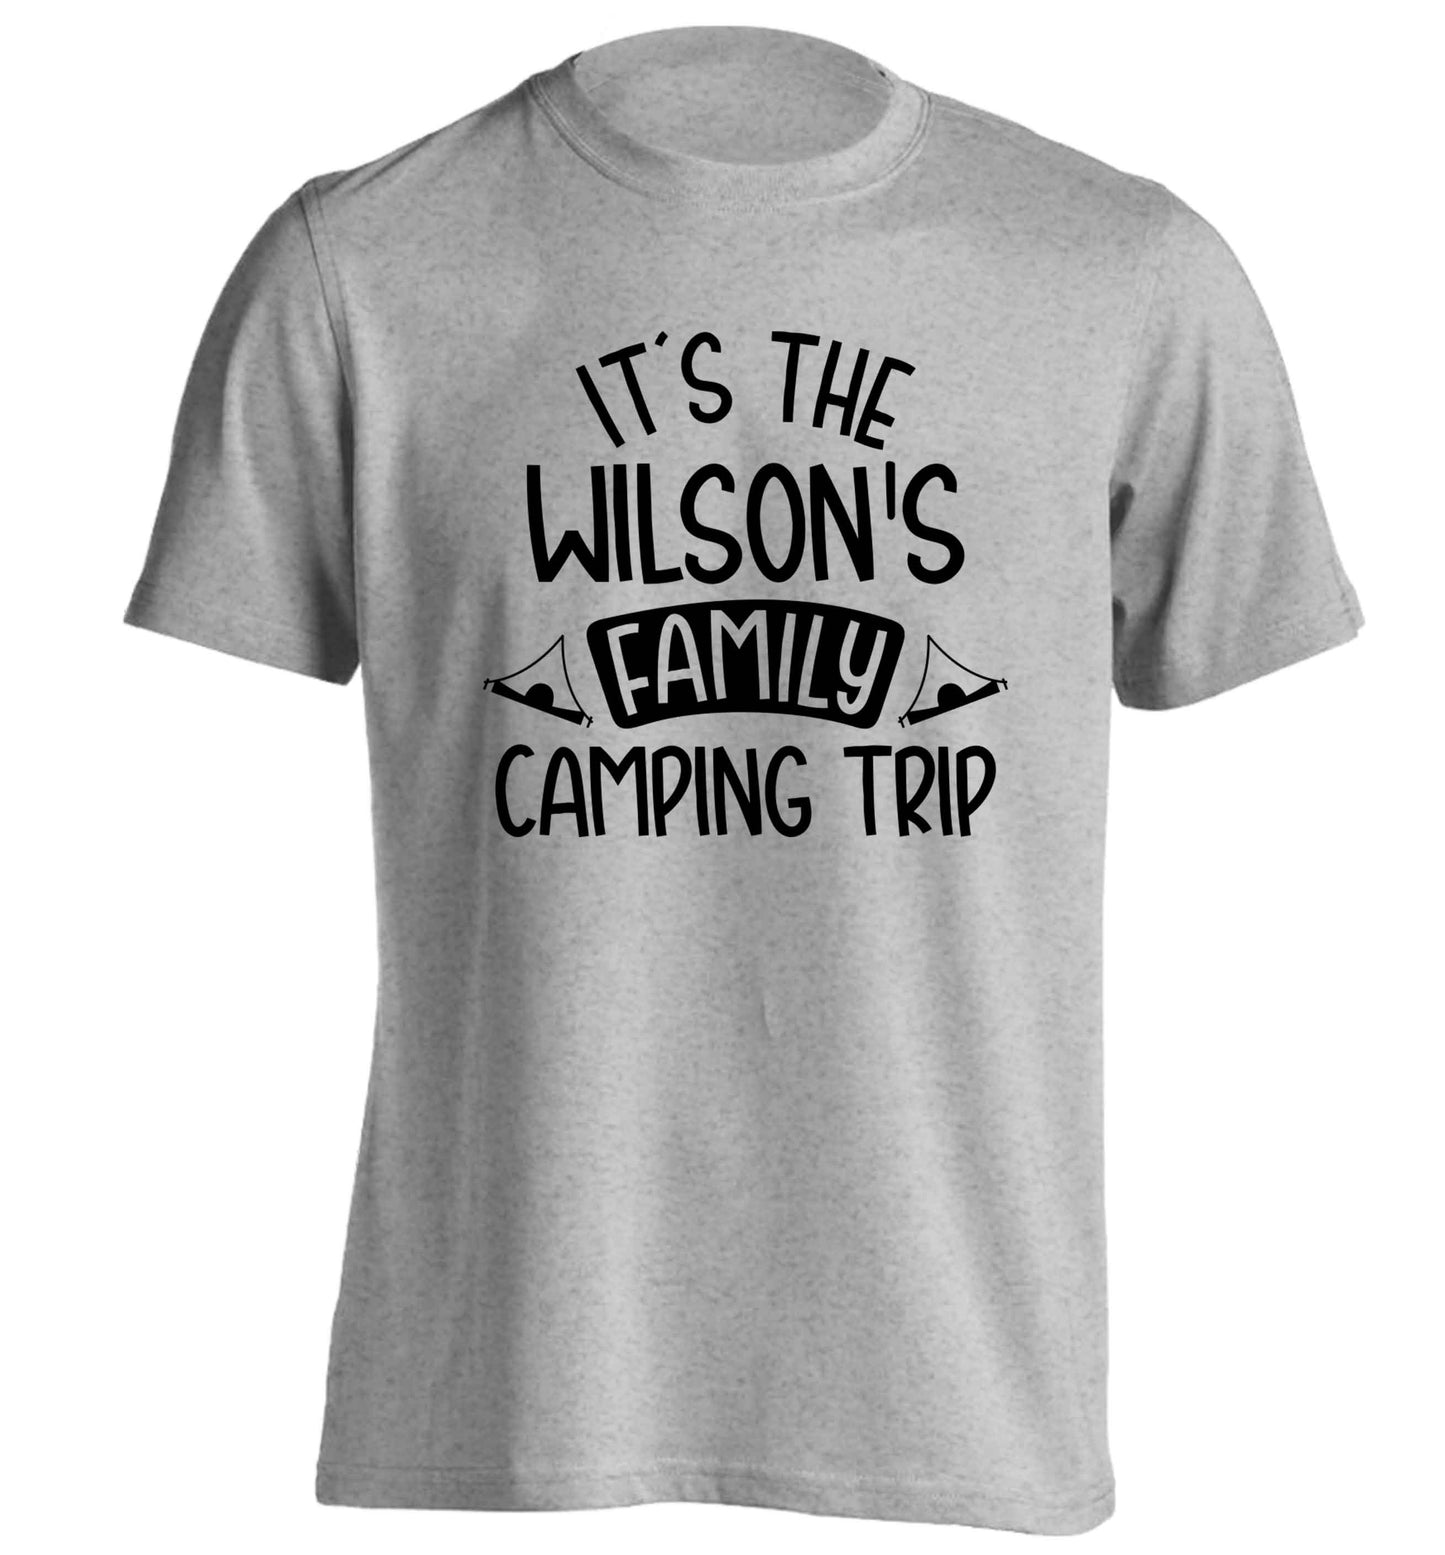 It's the Wilson's family camping trip personalised adults unisex grey Tshirt 2XL